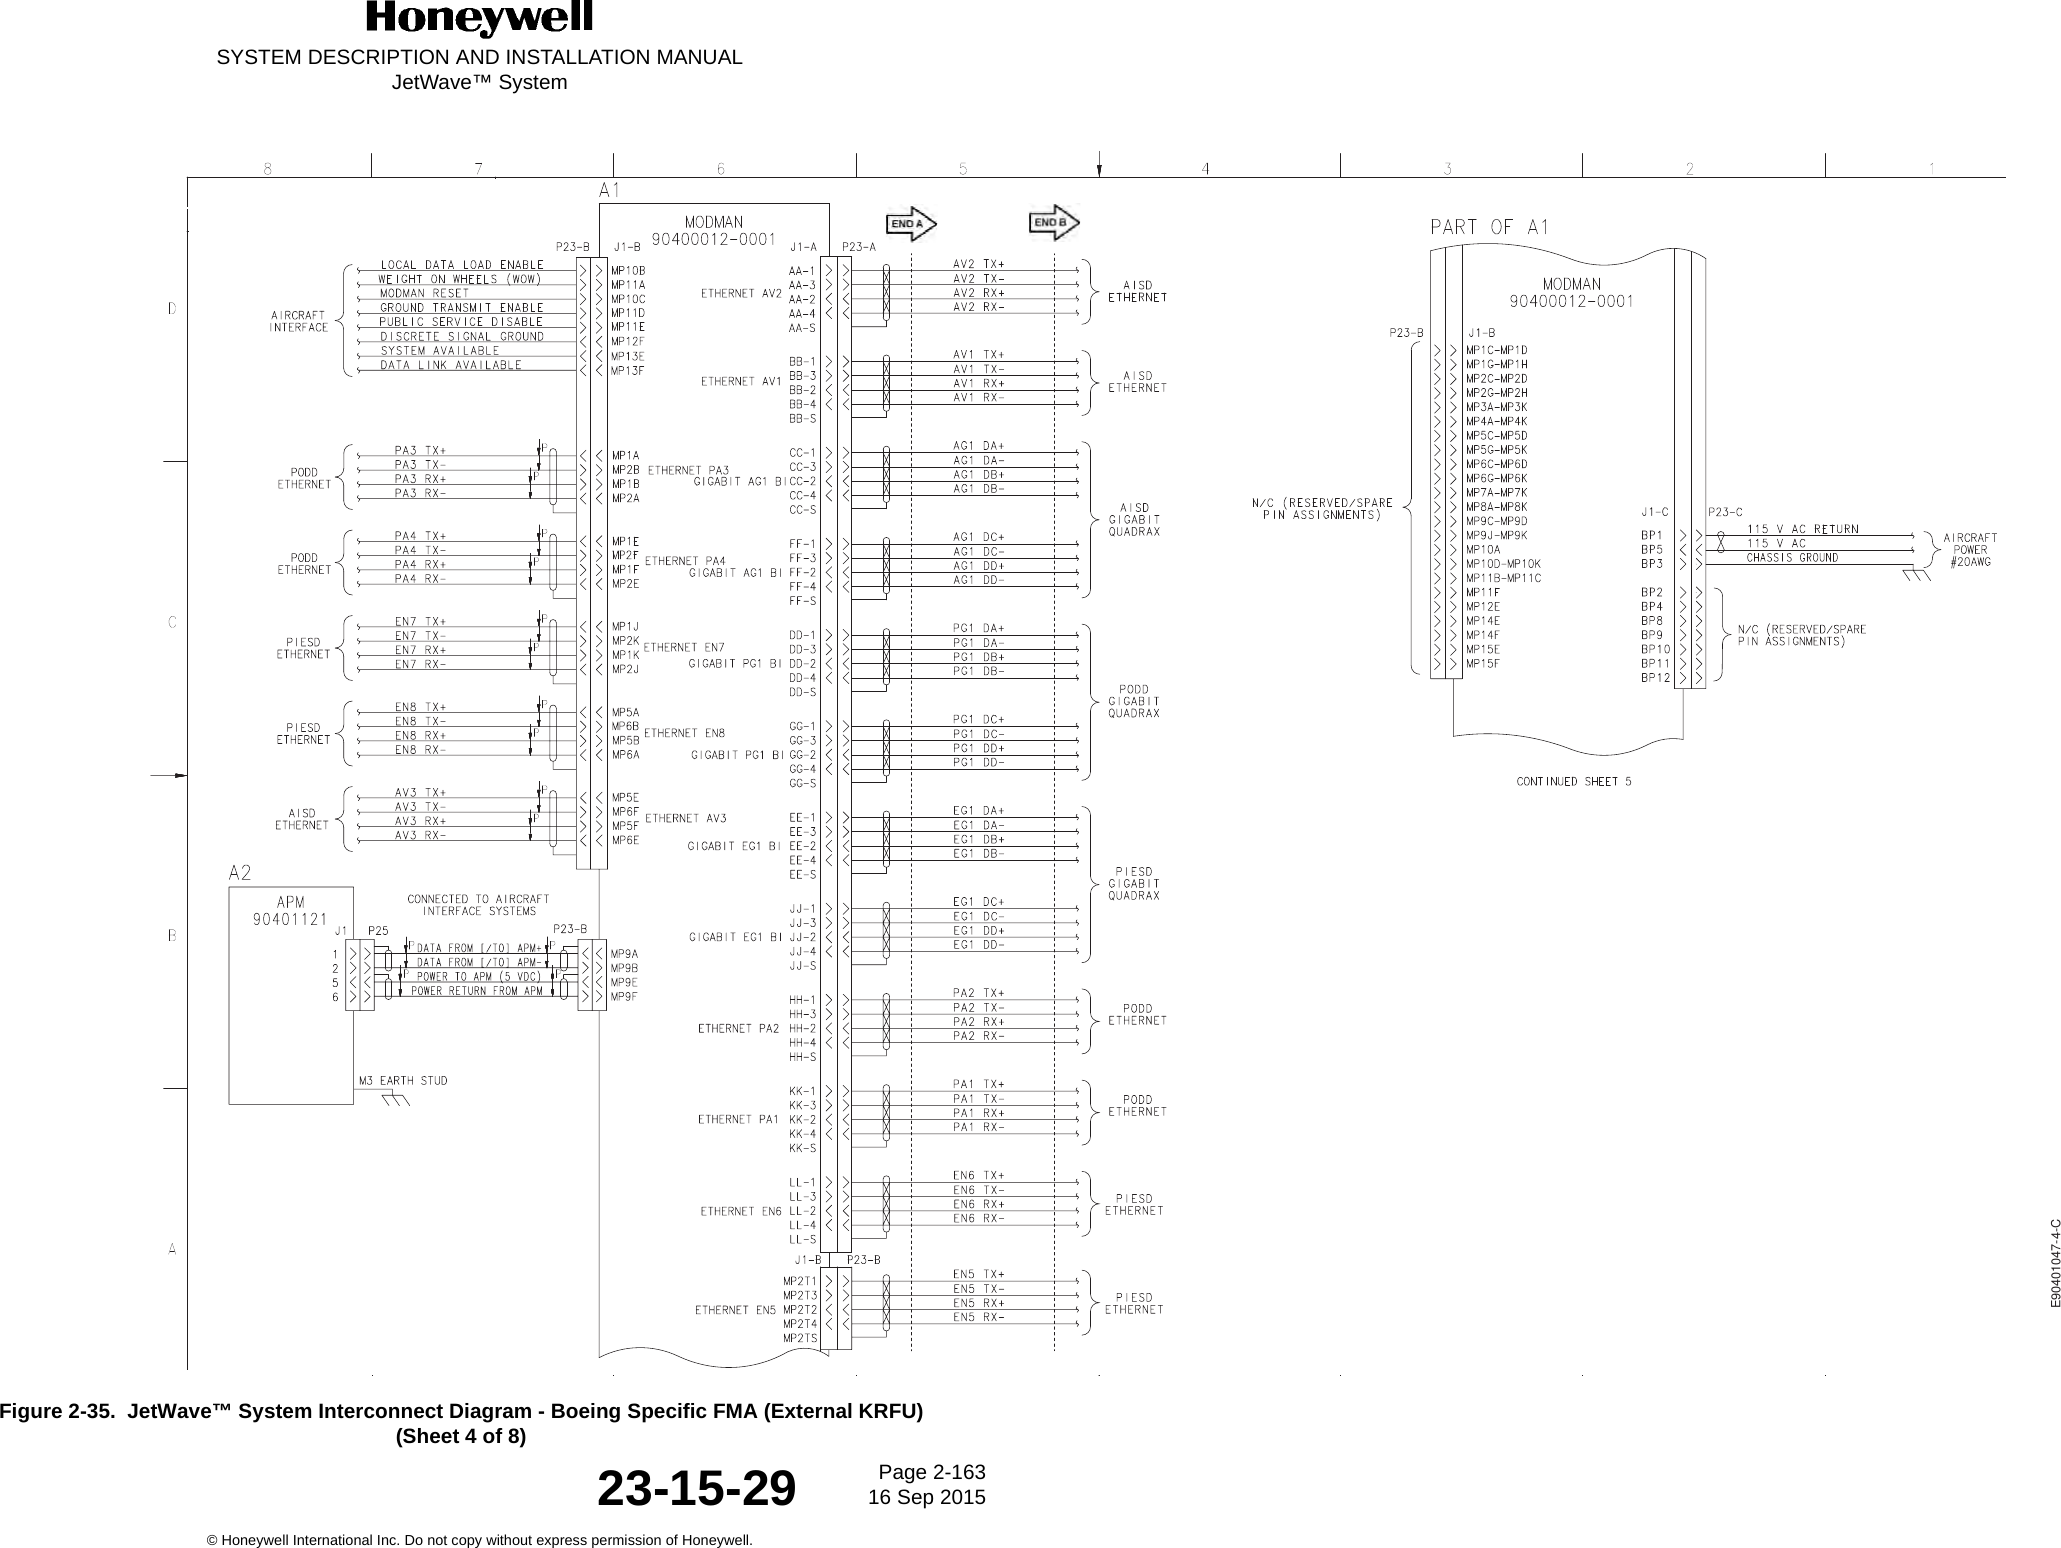 SYSTEM DESCRIPTION AND INSTALLATION MANUALJetWave™ SystemPage 2-163 16 Sep 2015© Honeywell International Inc. Do not copy without express permission of Honeywell.23-15-29Figure 2-35.  JetWave™ System Interconnect Diagram - Boeing Specific FMA (External KRFU) (Sheet 4 of 8)E90401047-4-C